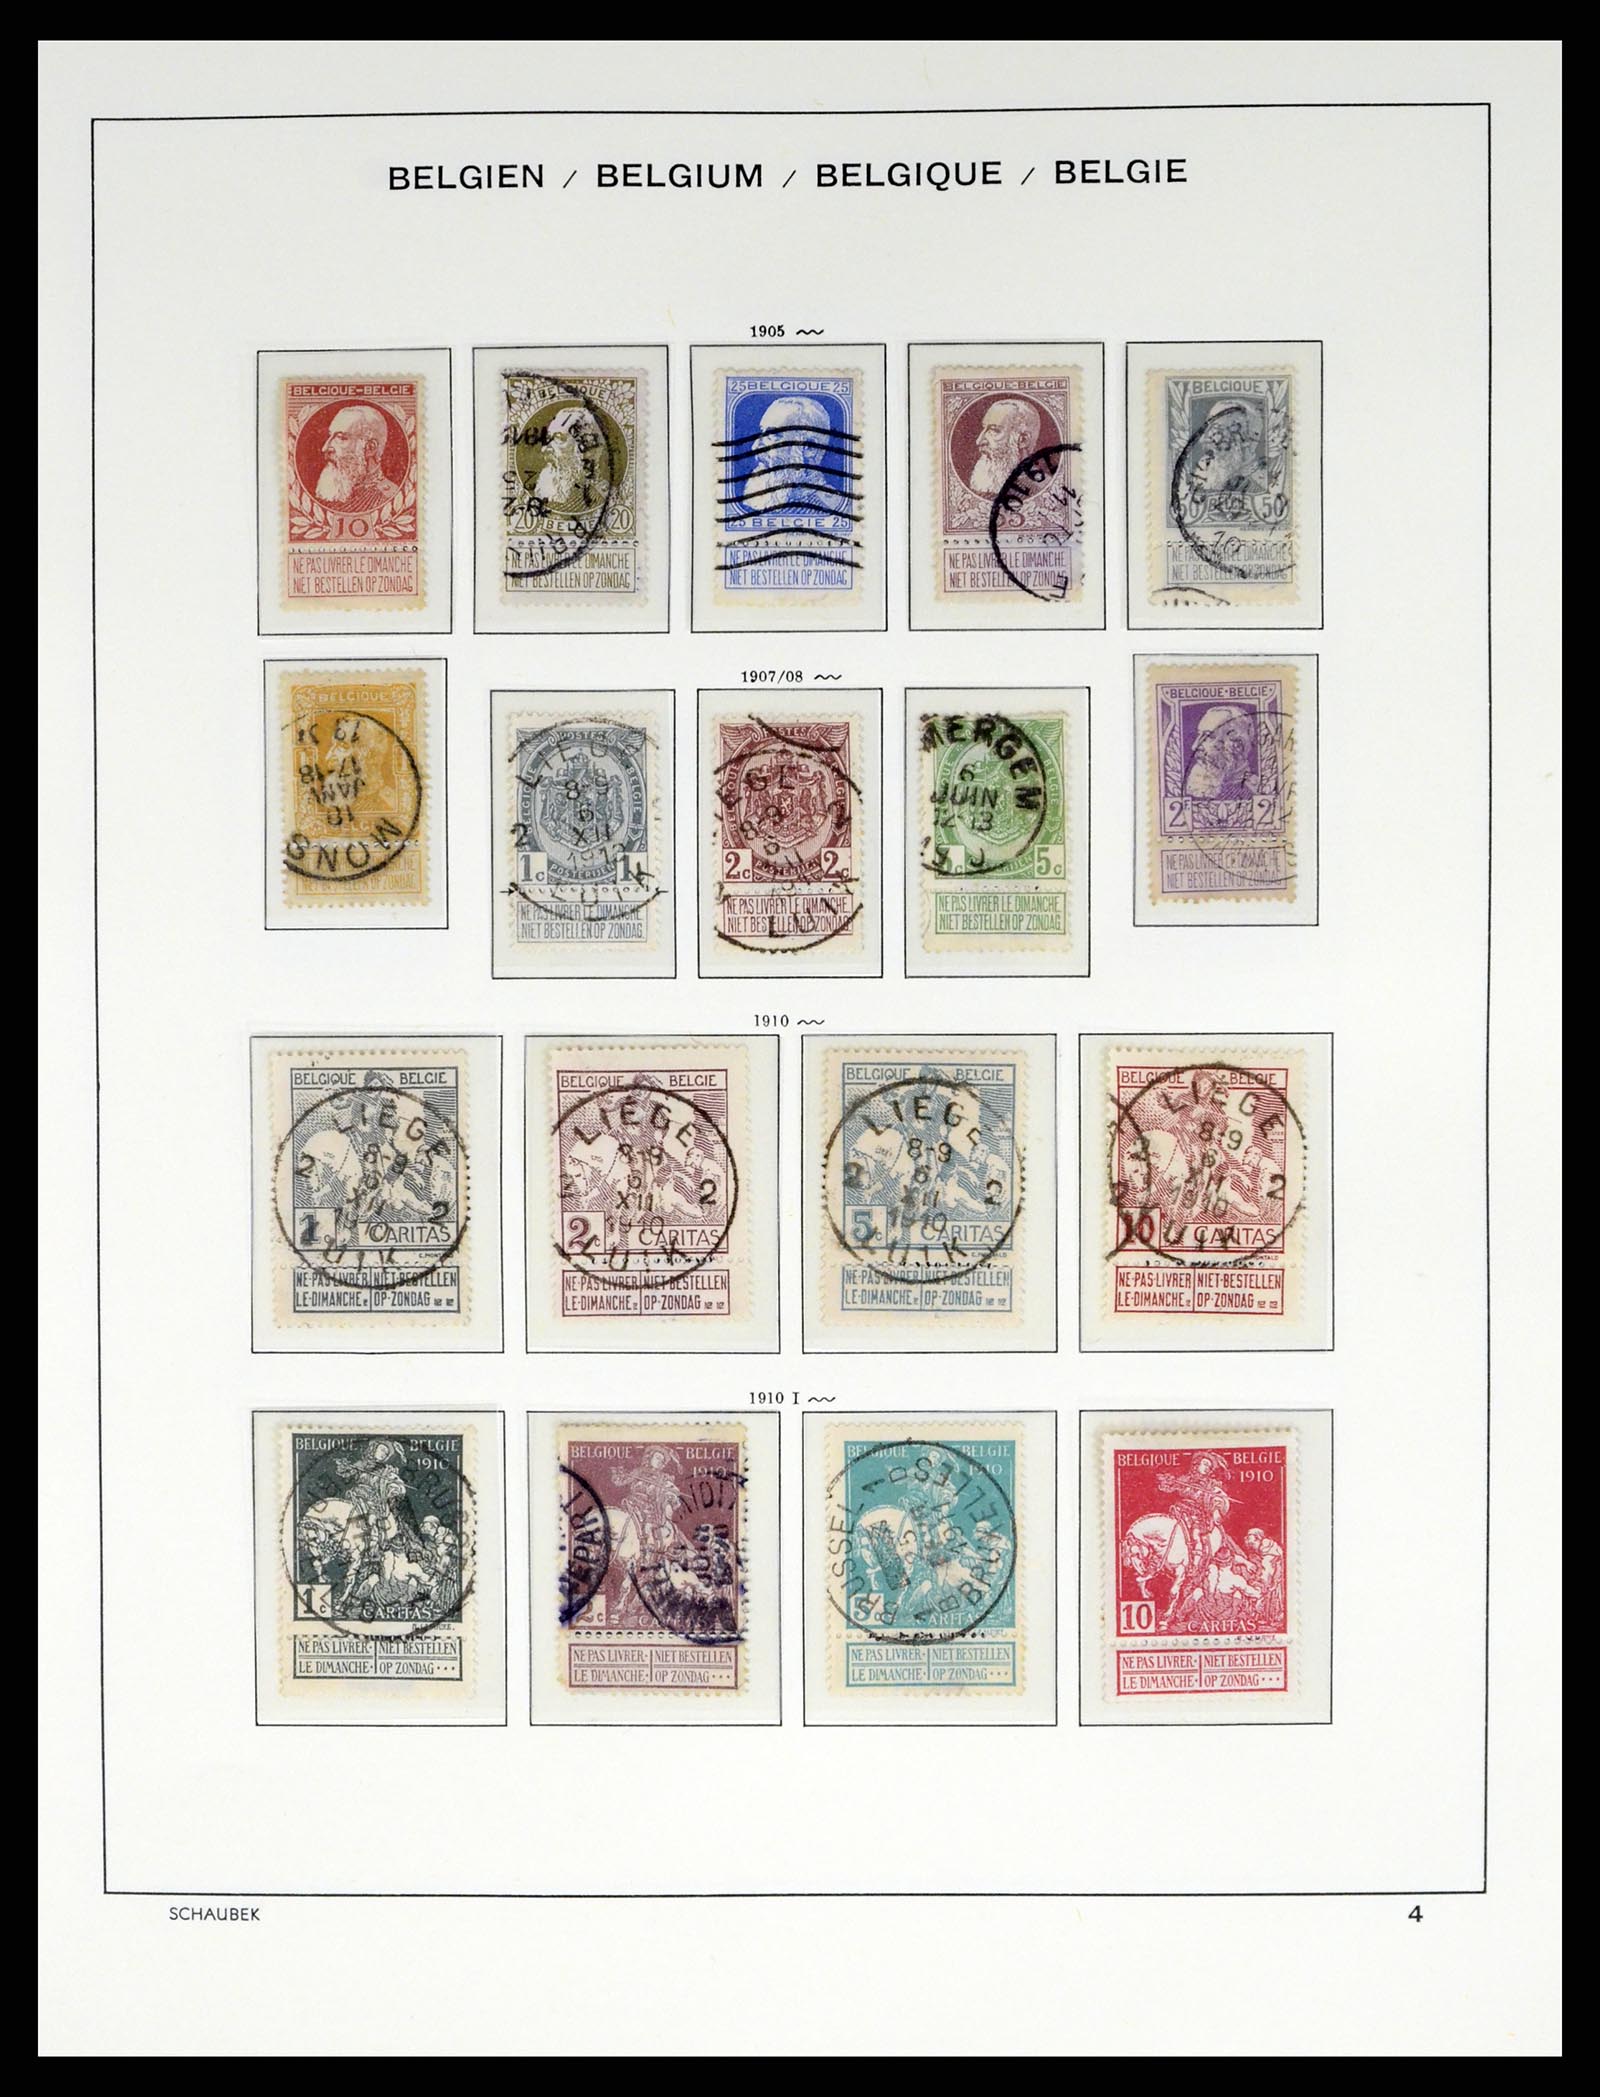 37595 005 - Stamp collection 37595 Super collection Belgium 1849-2015!